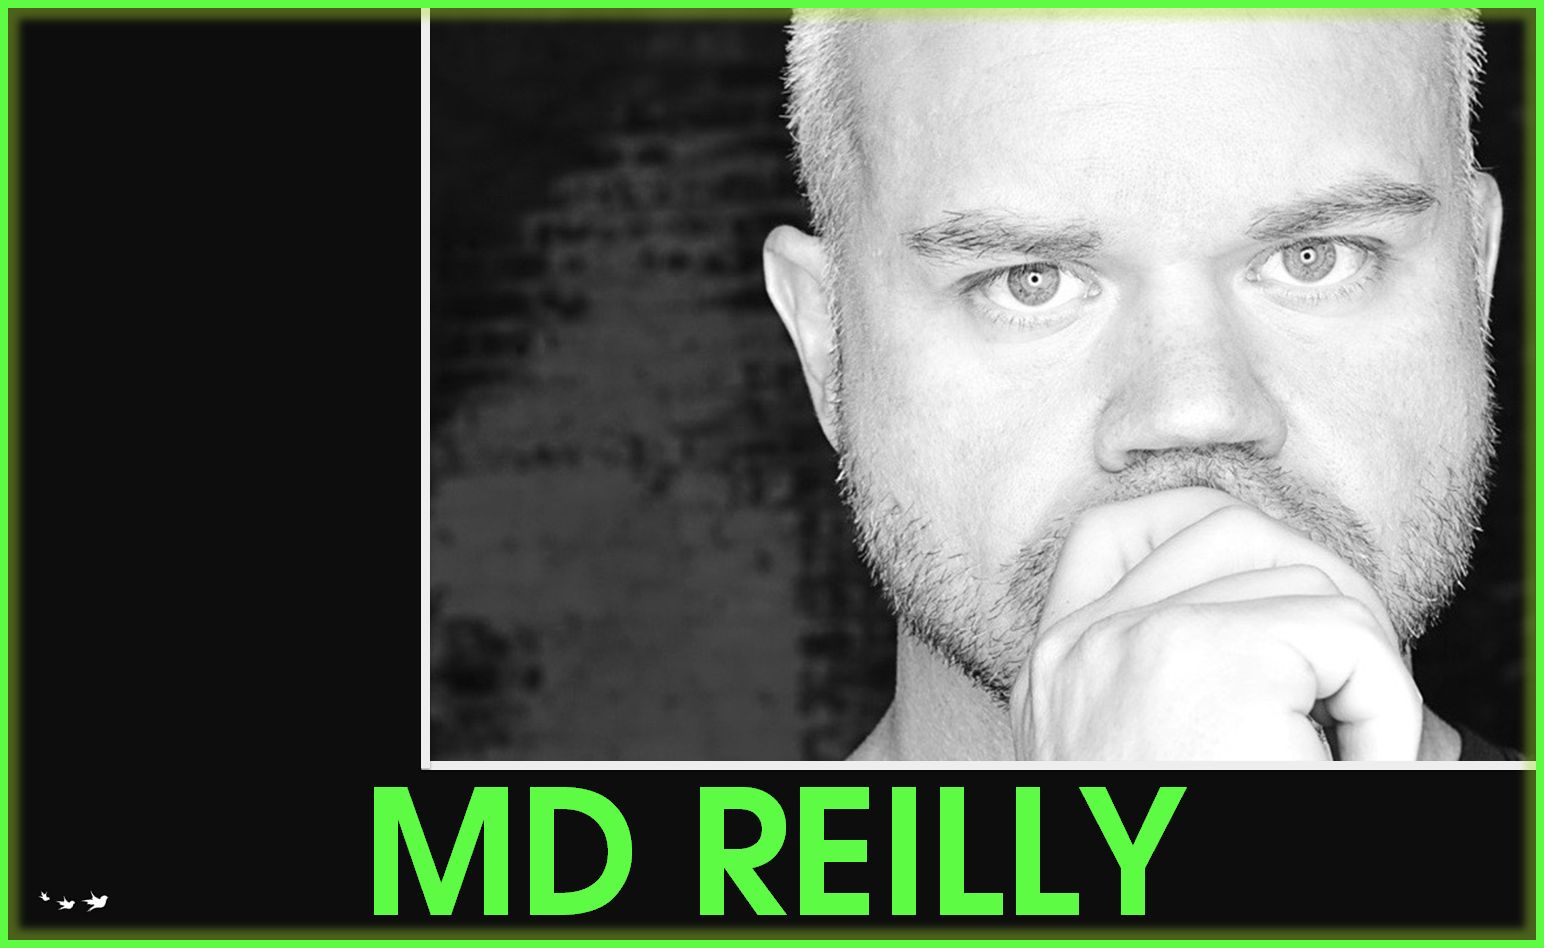 MD Reilly 35k a day success podcast interview business travel website